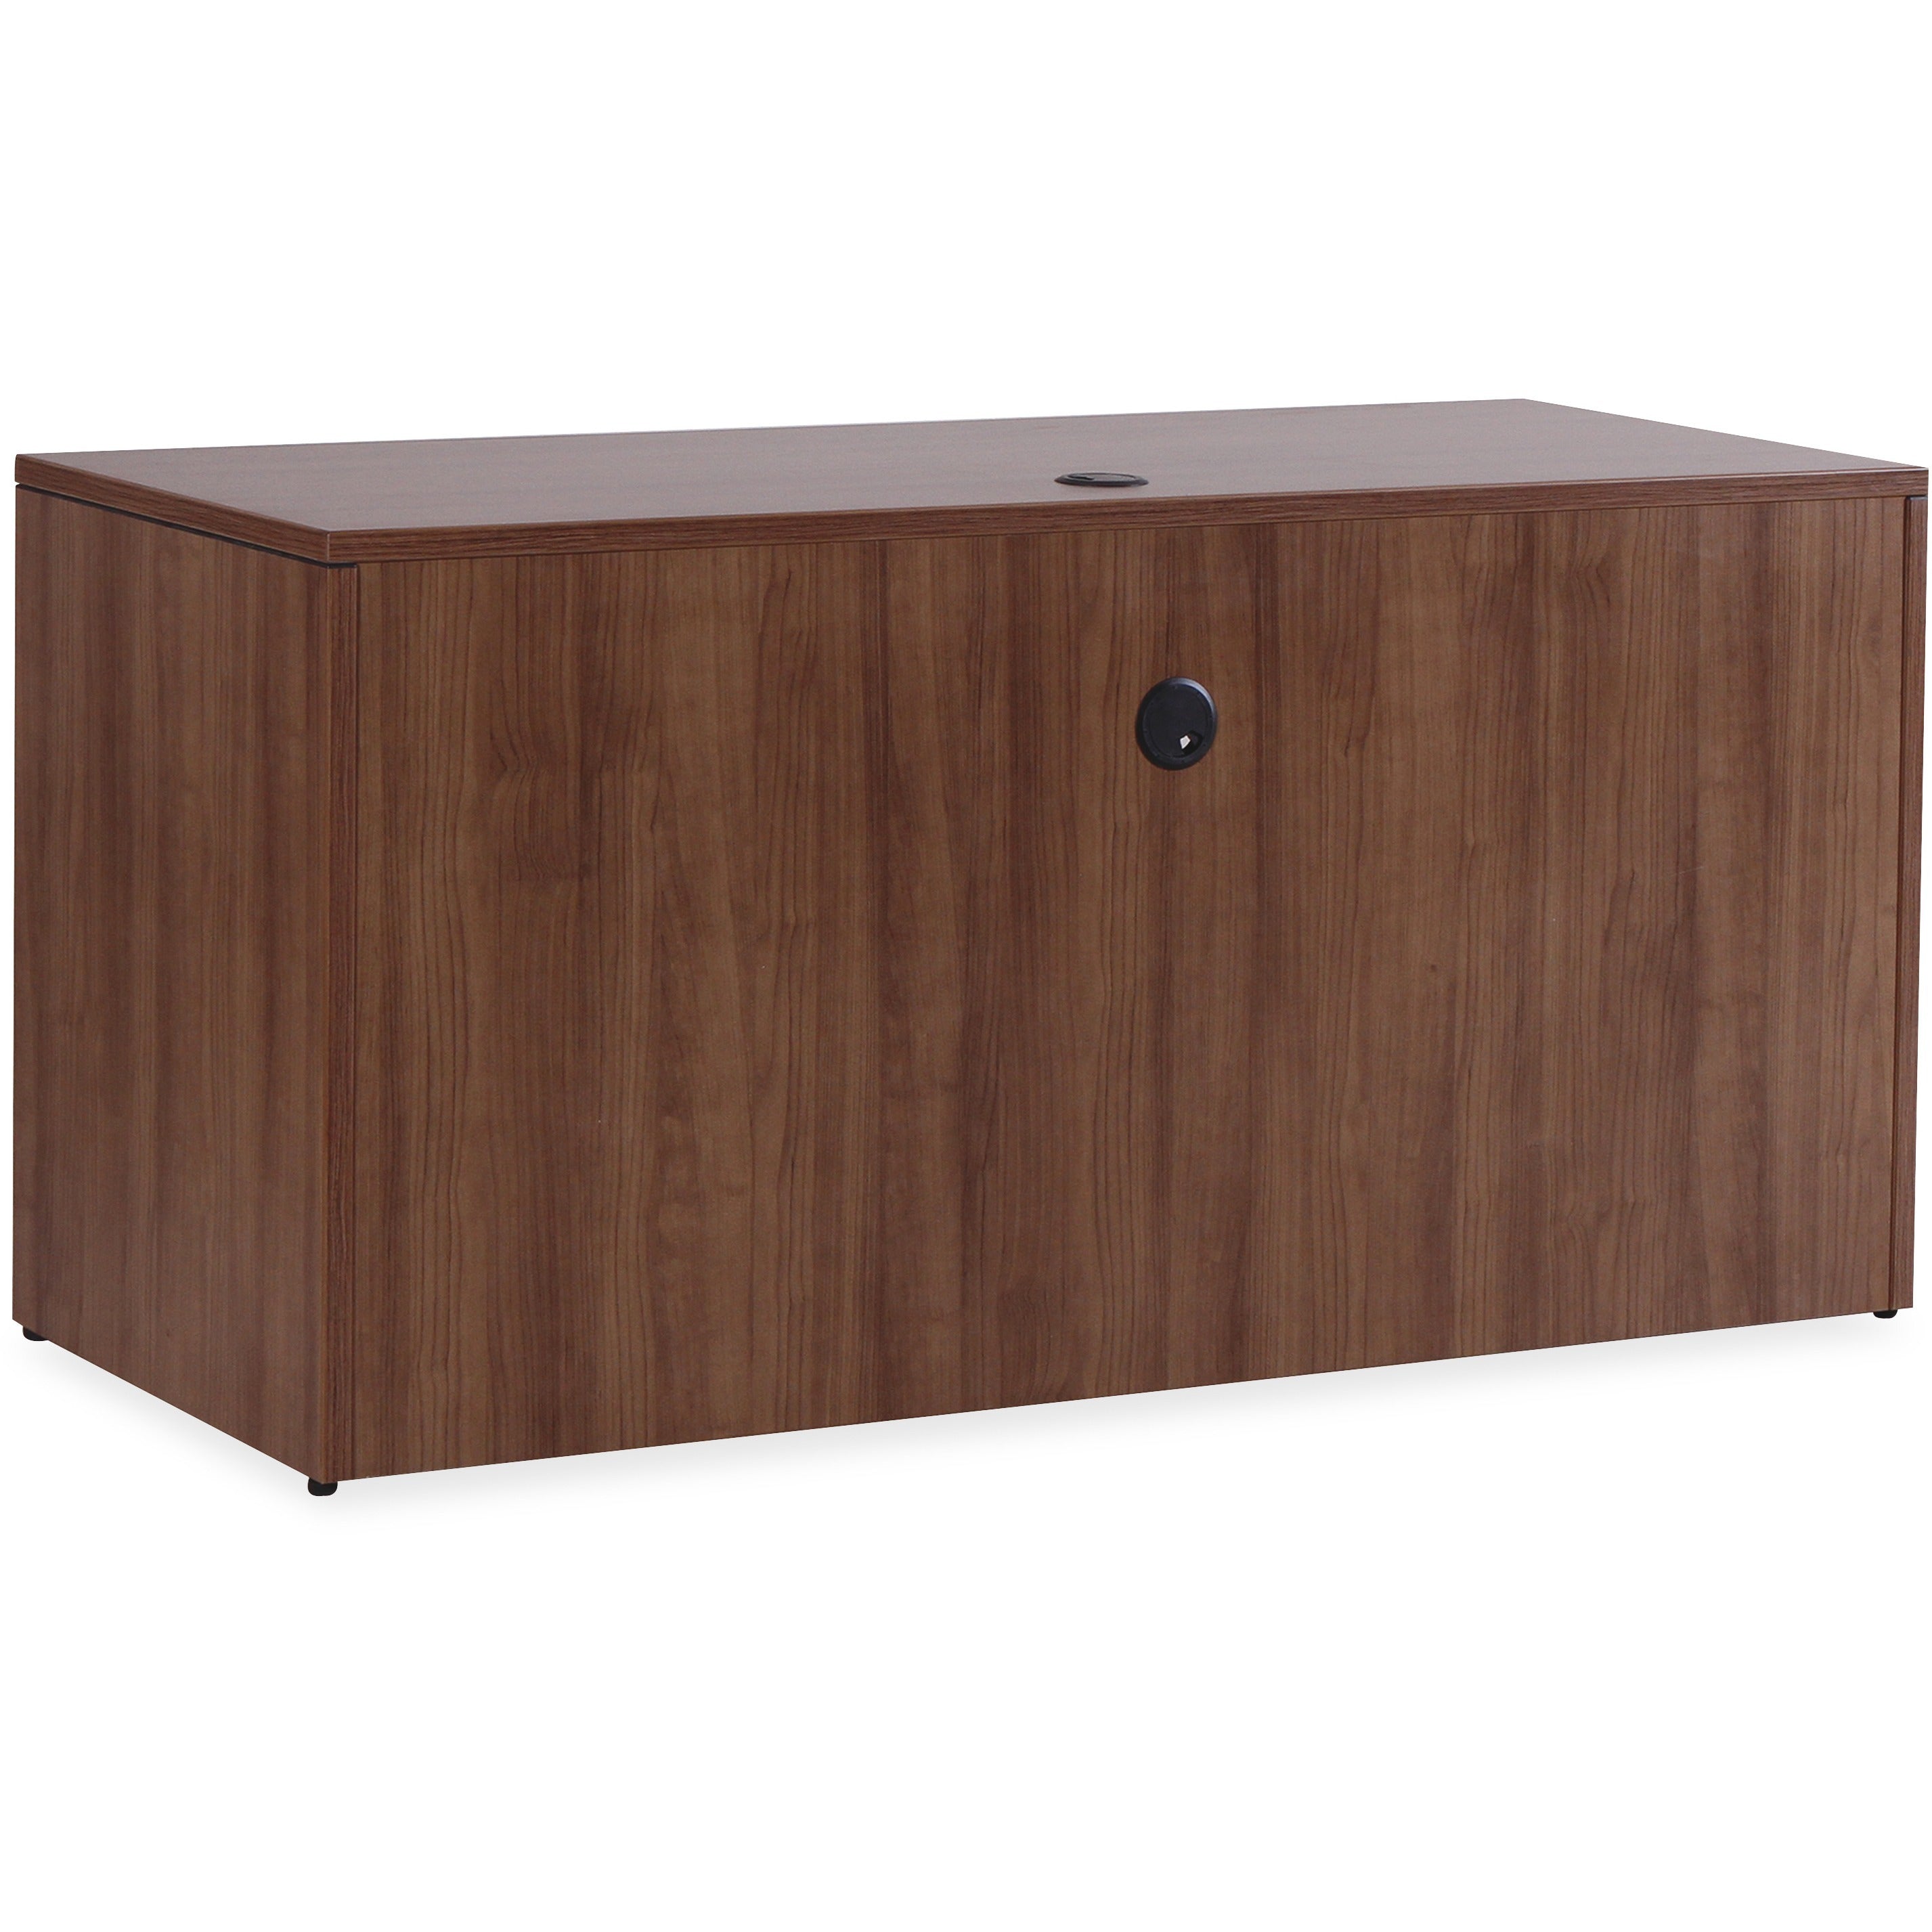 Lorell Essentials Series Credenza Shell - 66.1" x 23.6"29.5" Credenza, 1" Top, 3.8" Drawer Pull, 0.1" Edge - Walnut, Laminate Table Top - Durable, Grommet, Cord Management, Adjustable Feet, Lockable - For Office - 